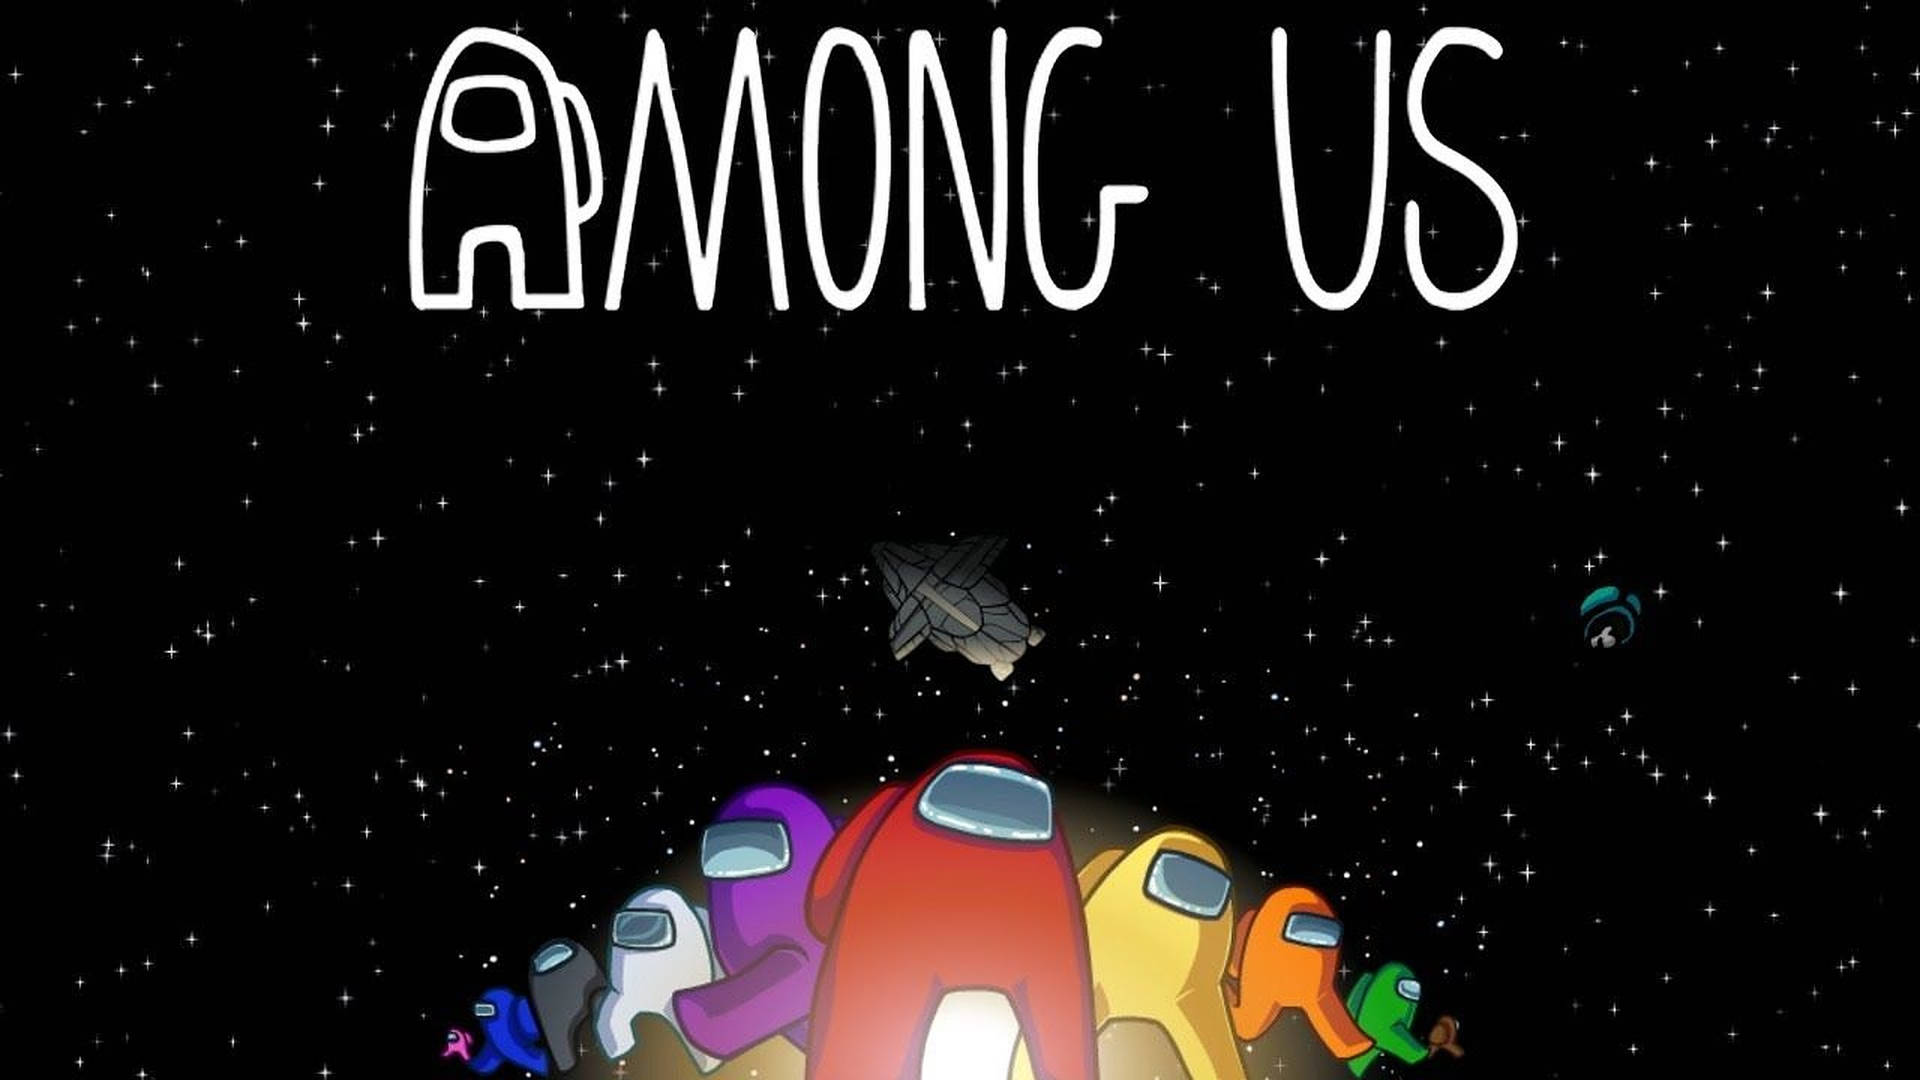 Among Us Space Poster